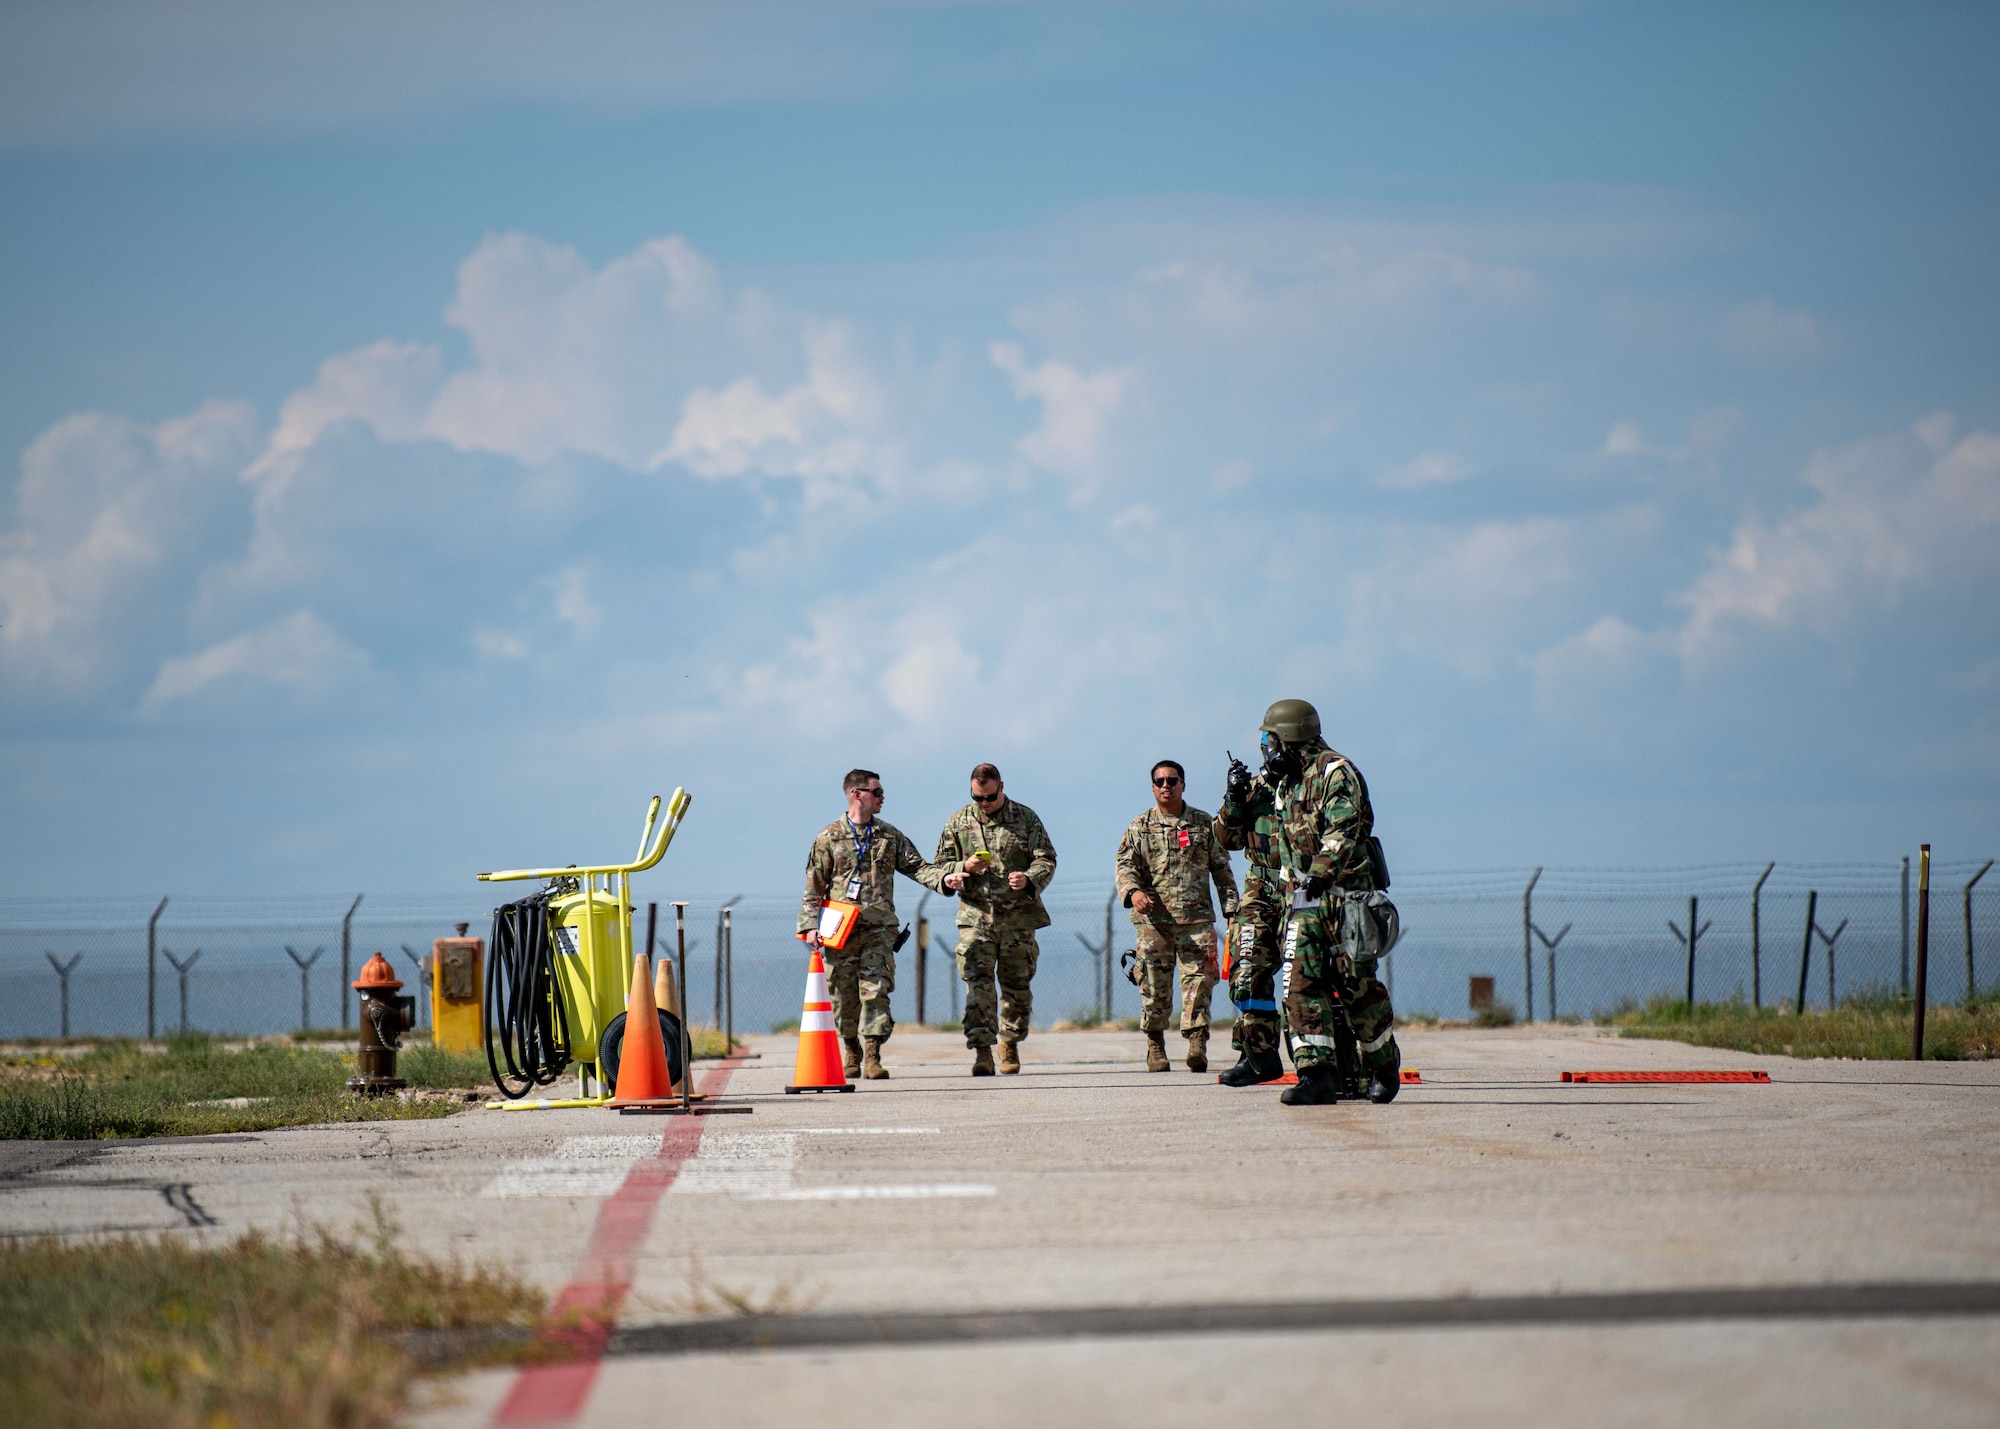 Airmen from the 421st Fighter Generation Squadron conduct post-attack reconnaissance sweeps during a Phase II readiness exercise, September 15th, 2022, held on Hill Air Force Base, Utah.  The exercise consisted of self-aid buddy care, chemical attacks, and their ability to survive and operate in a simulated deployed scenario. (U.S. Air Force photo by Staff Sgt. Codie Trimble)